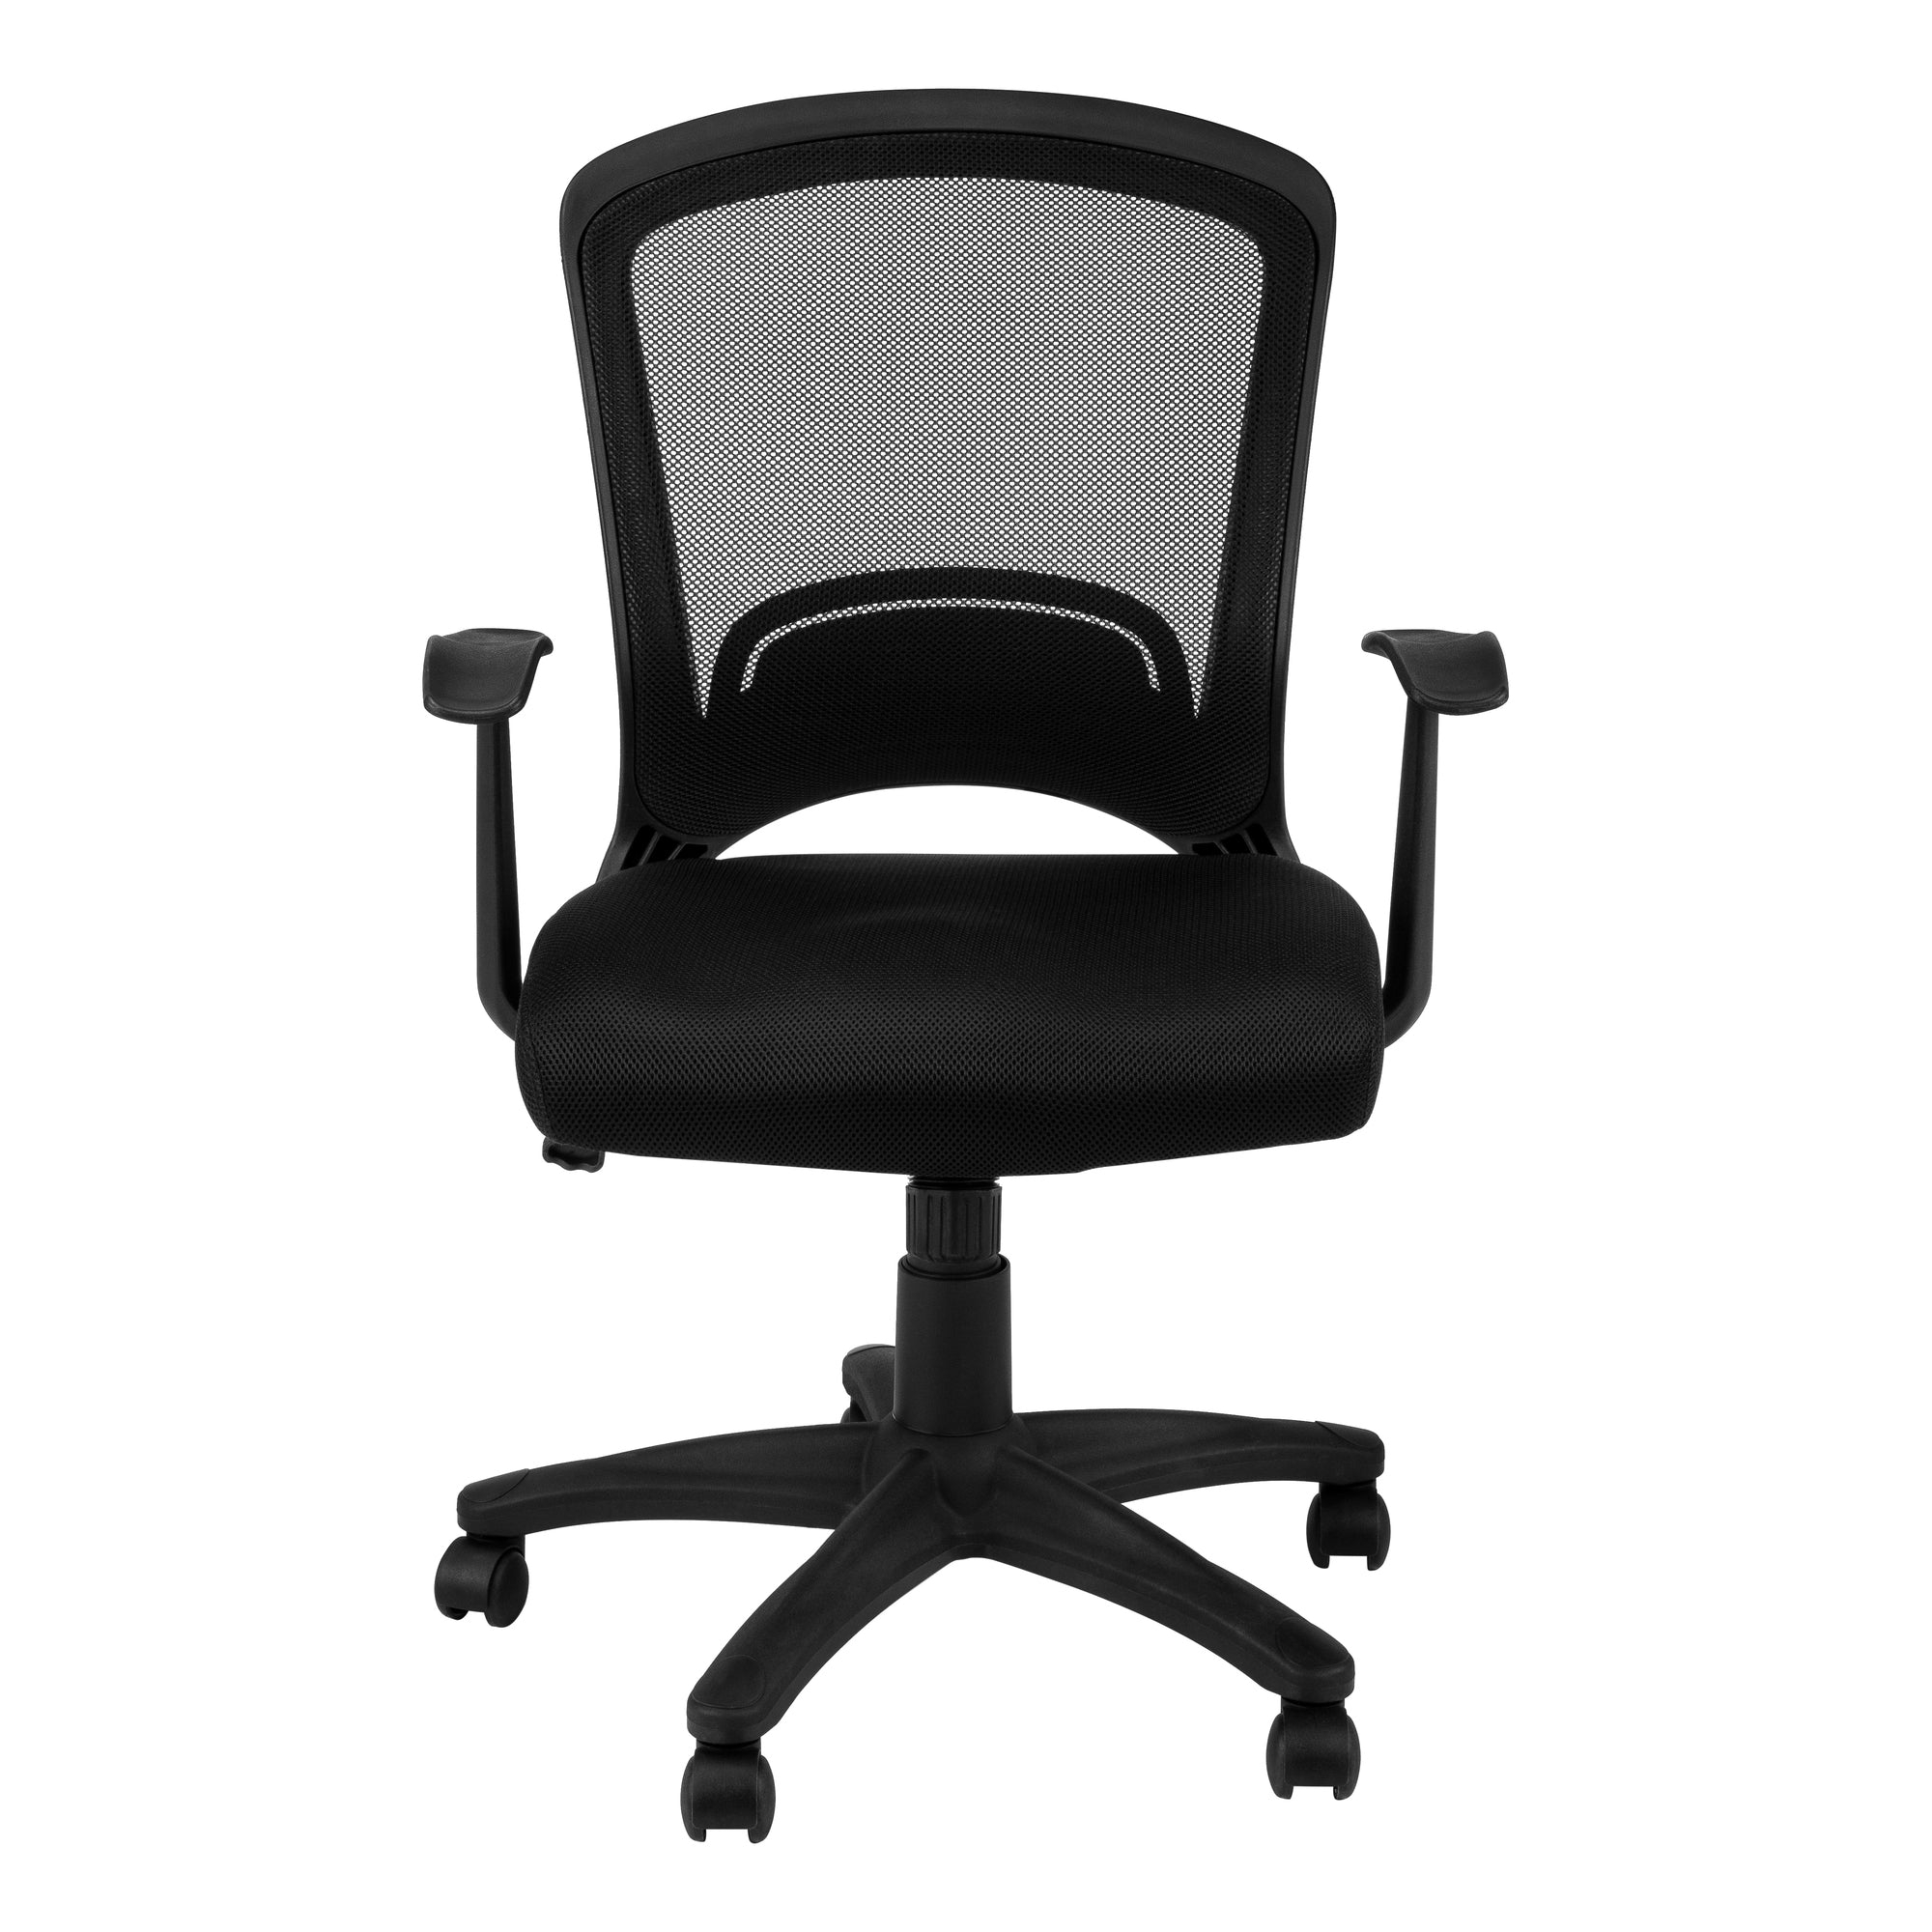 Black-Polyester-Seat-Swivel-Adjustable-Task-Chair-Mesh-Back-Plastic-Frame-Office-Chairs